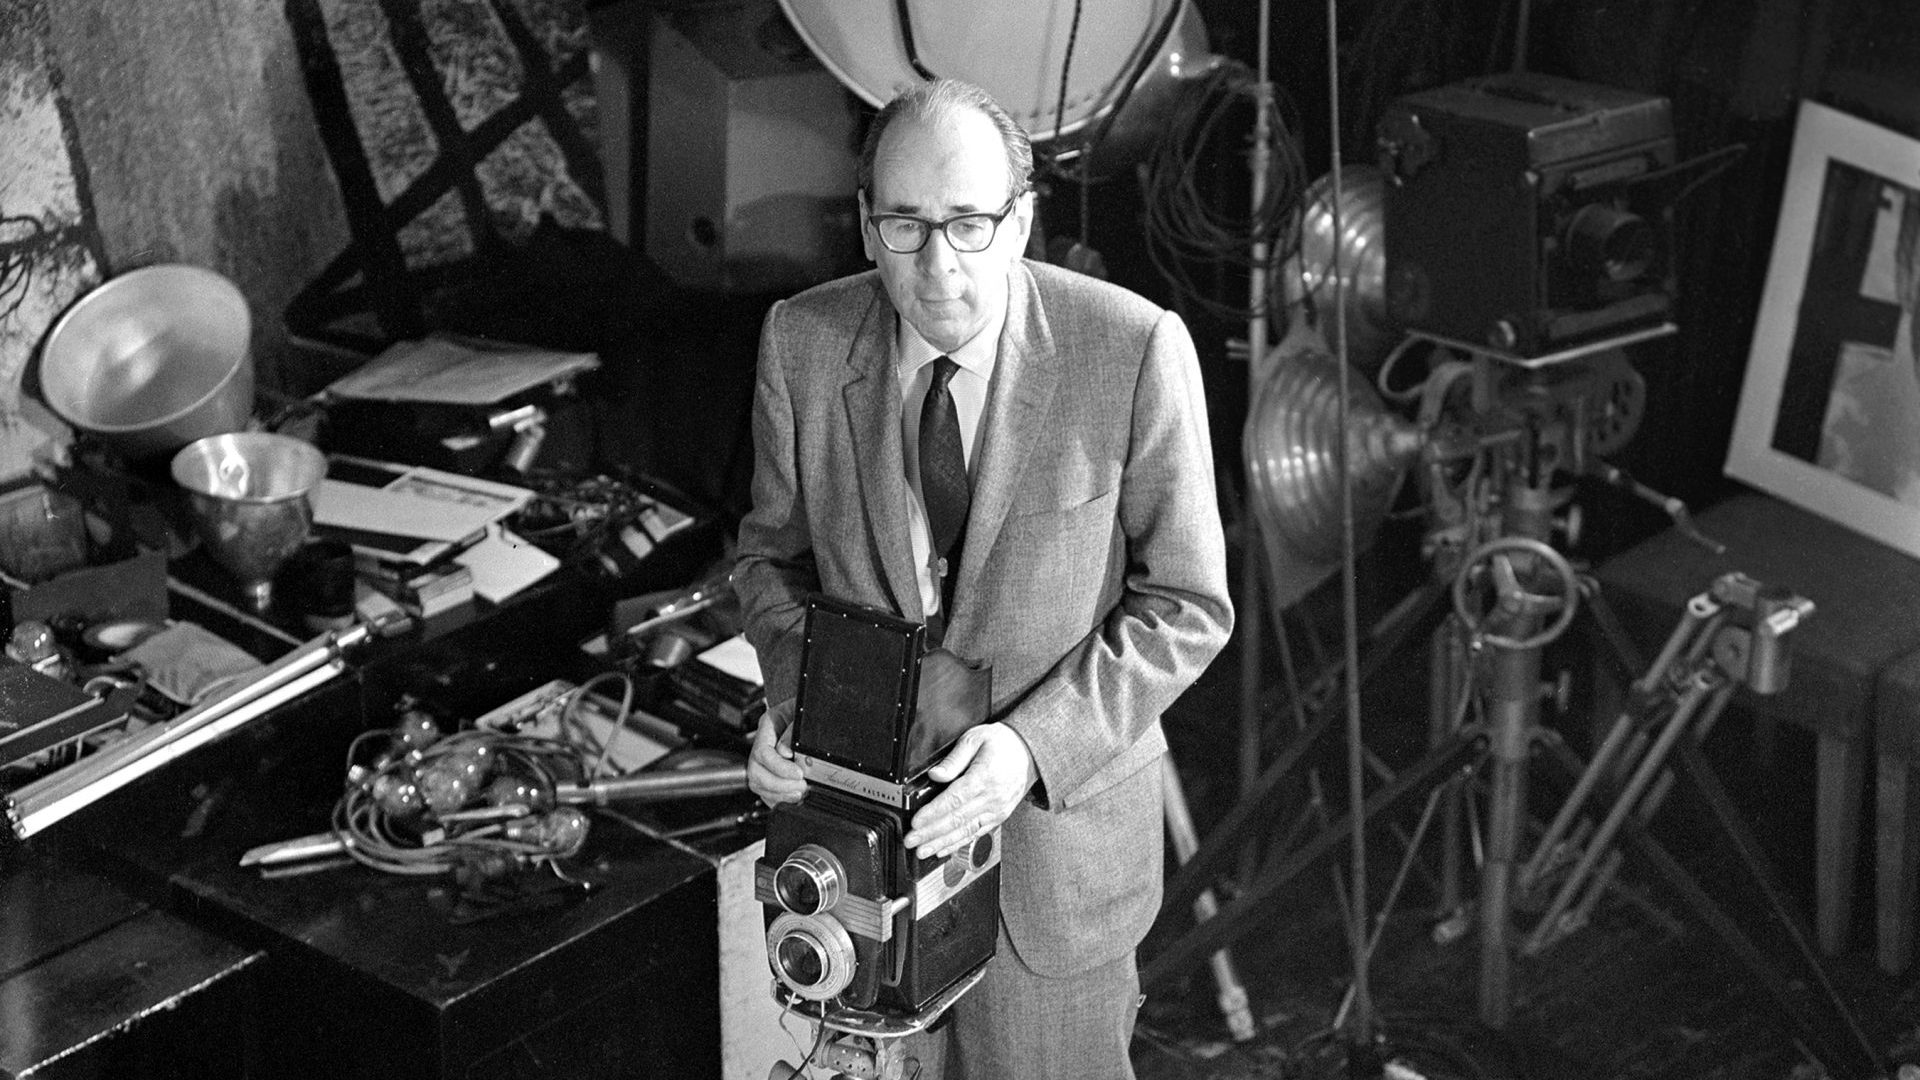 Philippe Halsman lines up his camera in his studio on 67th
Street, New York in an episode of the CBS celebrity interview
series Person to Person, 1960. Photo: CBS Photo Archive/Getty